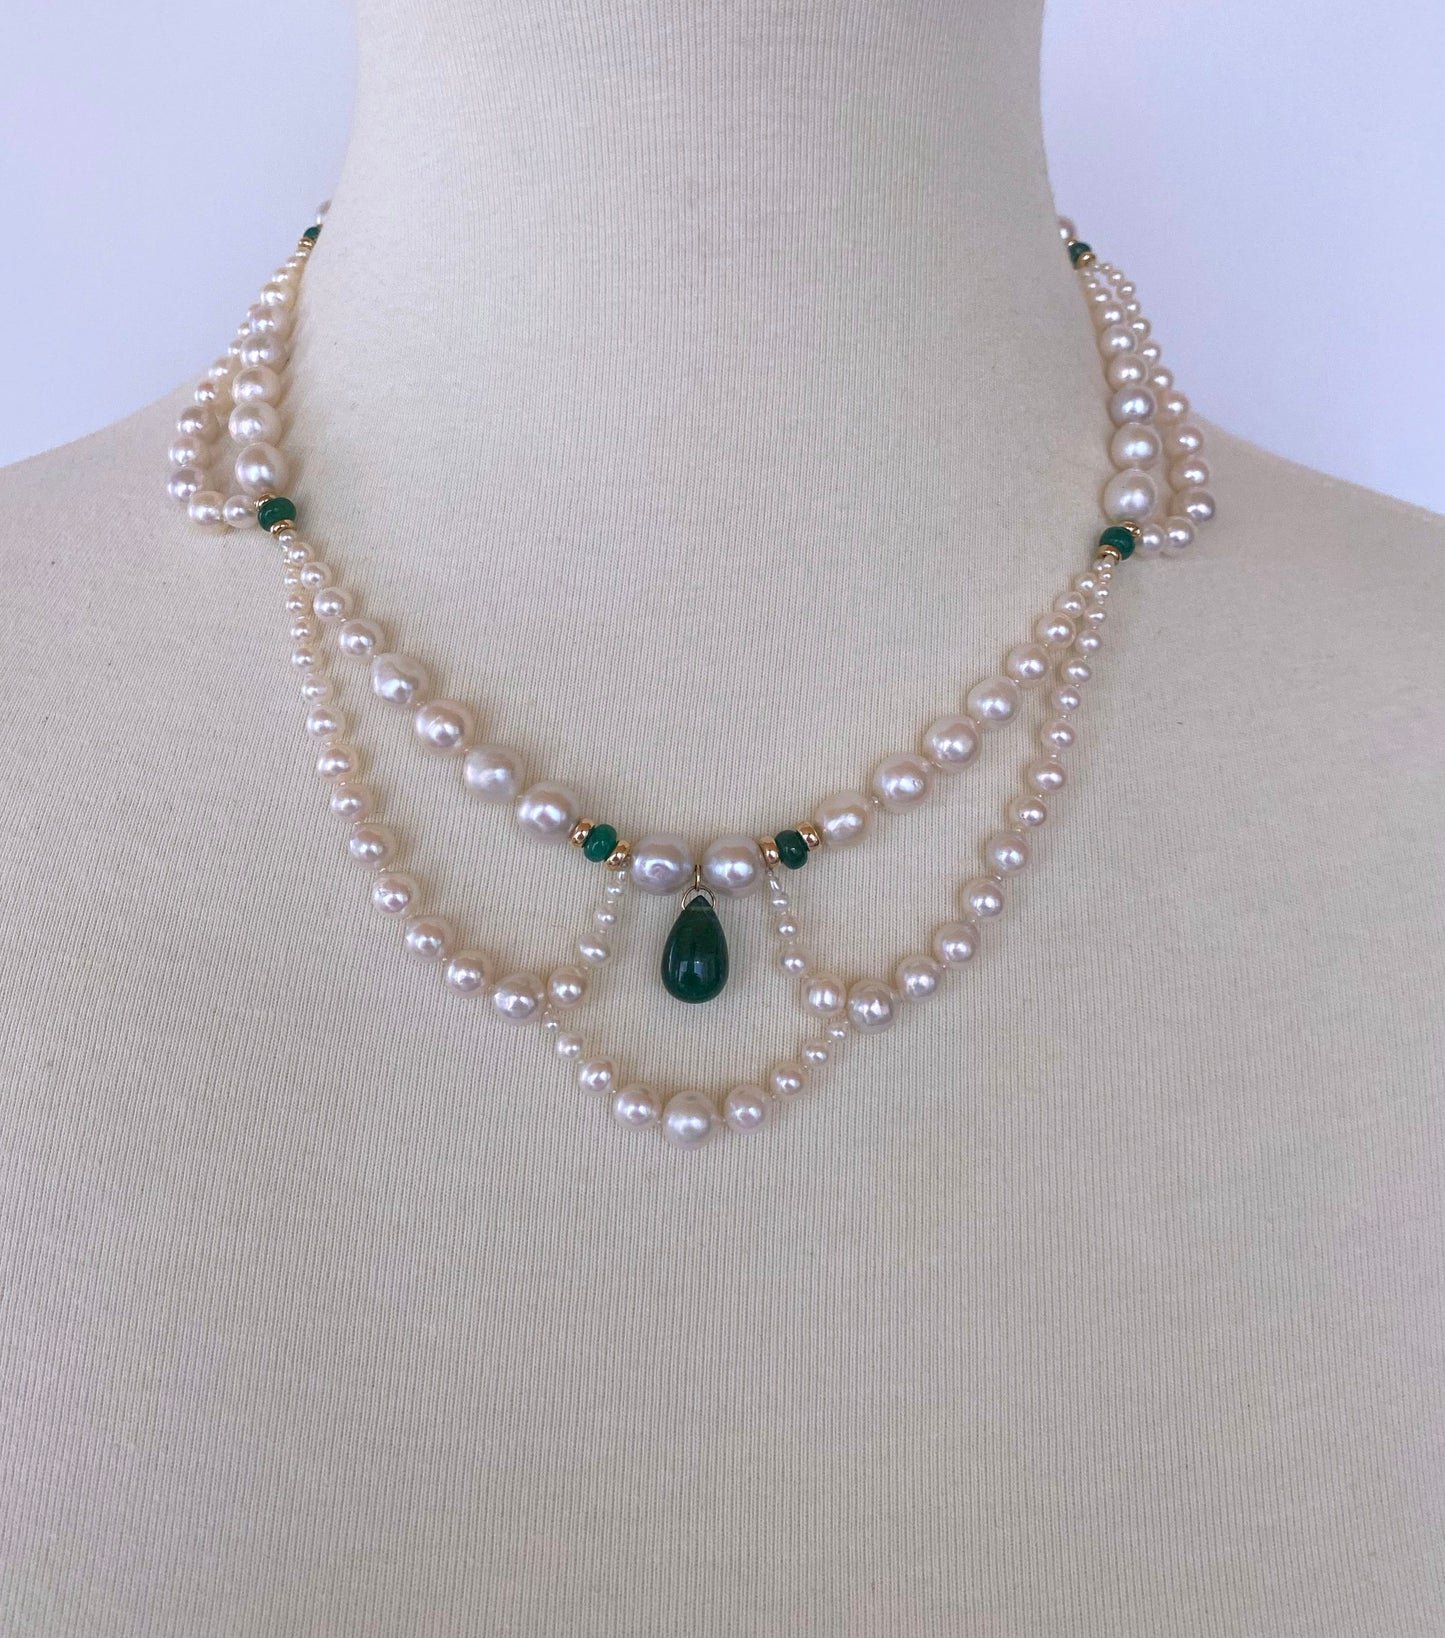 Graduated & Draped Pearl, Emerald Necklace with 14K Yellow Gold